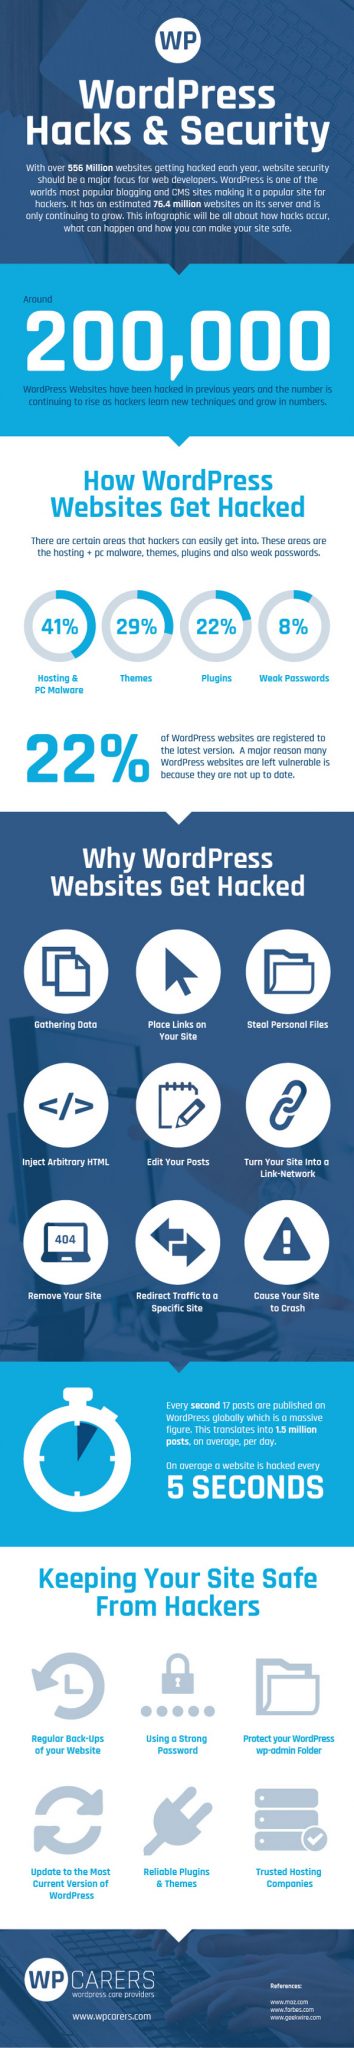 WordPress Hacks and Security (Infographic)